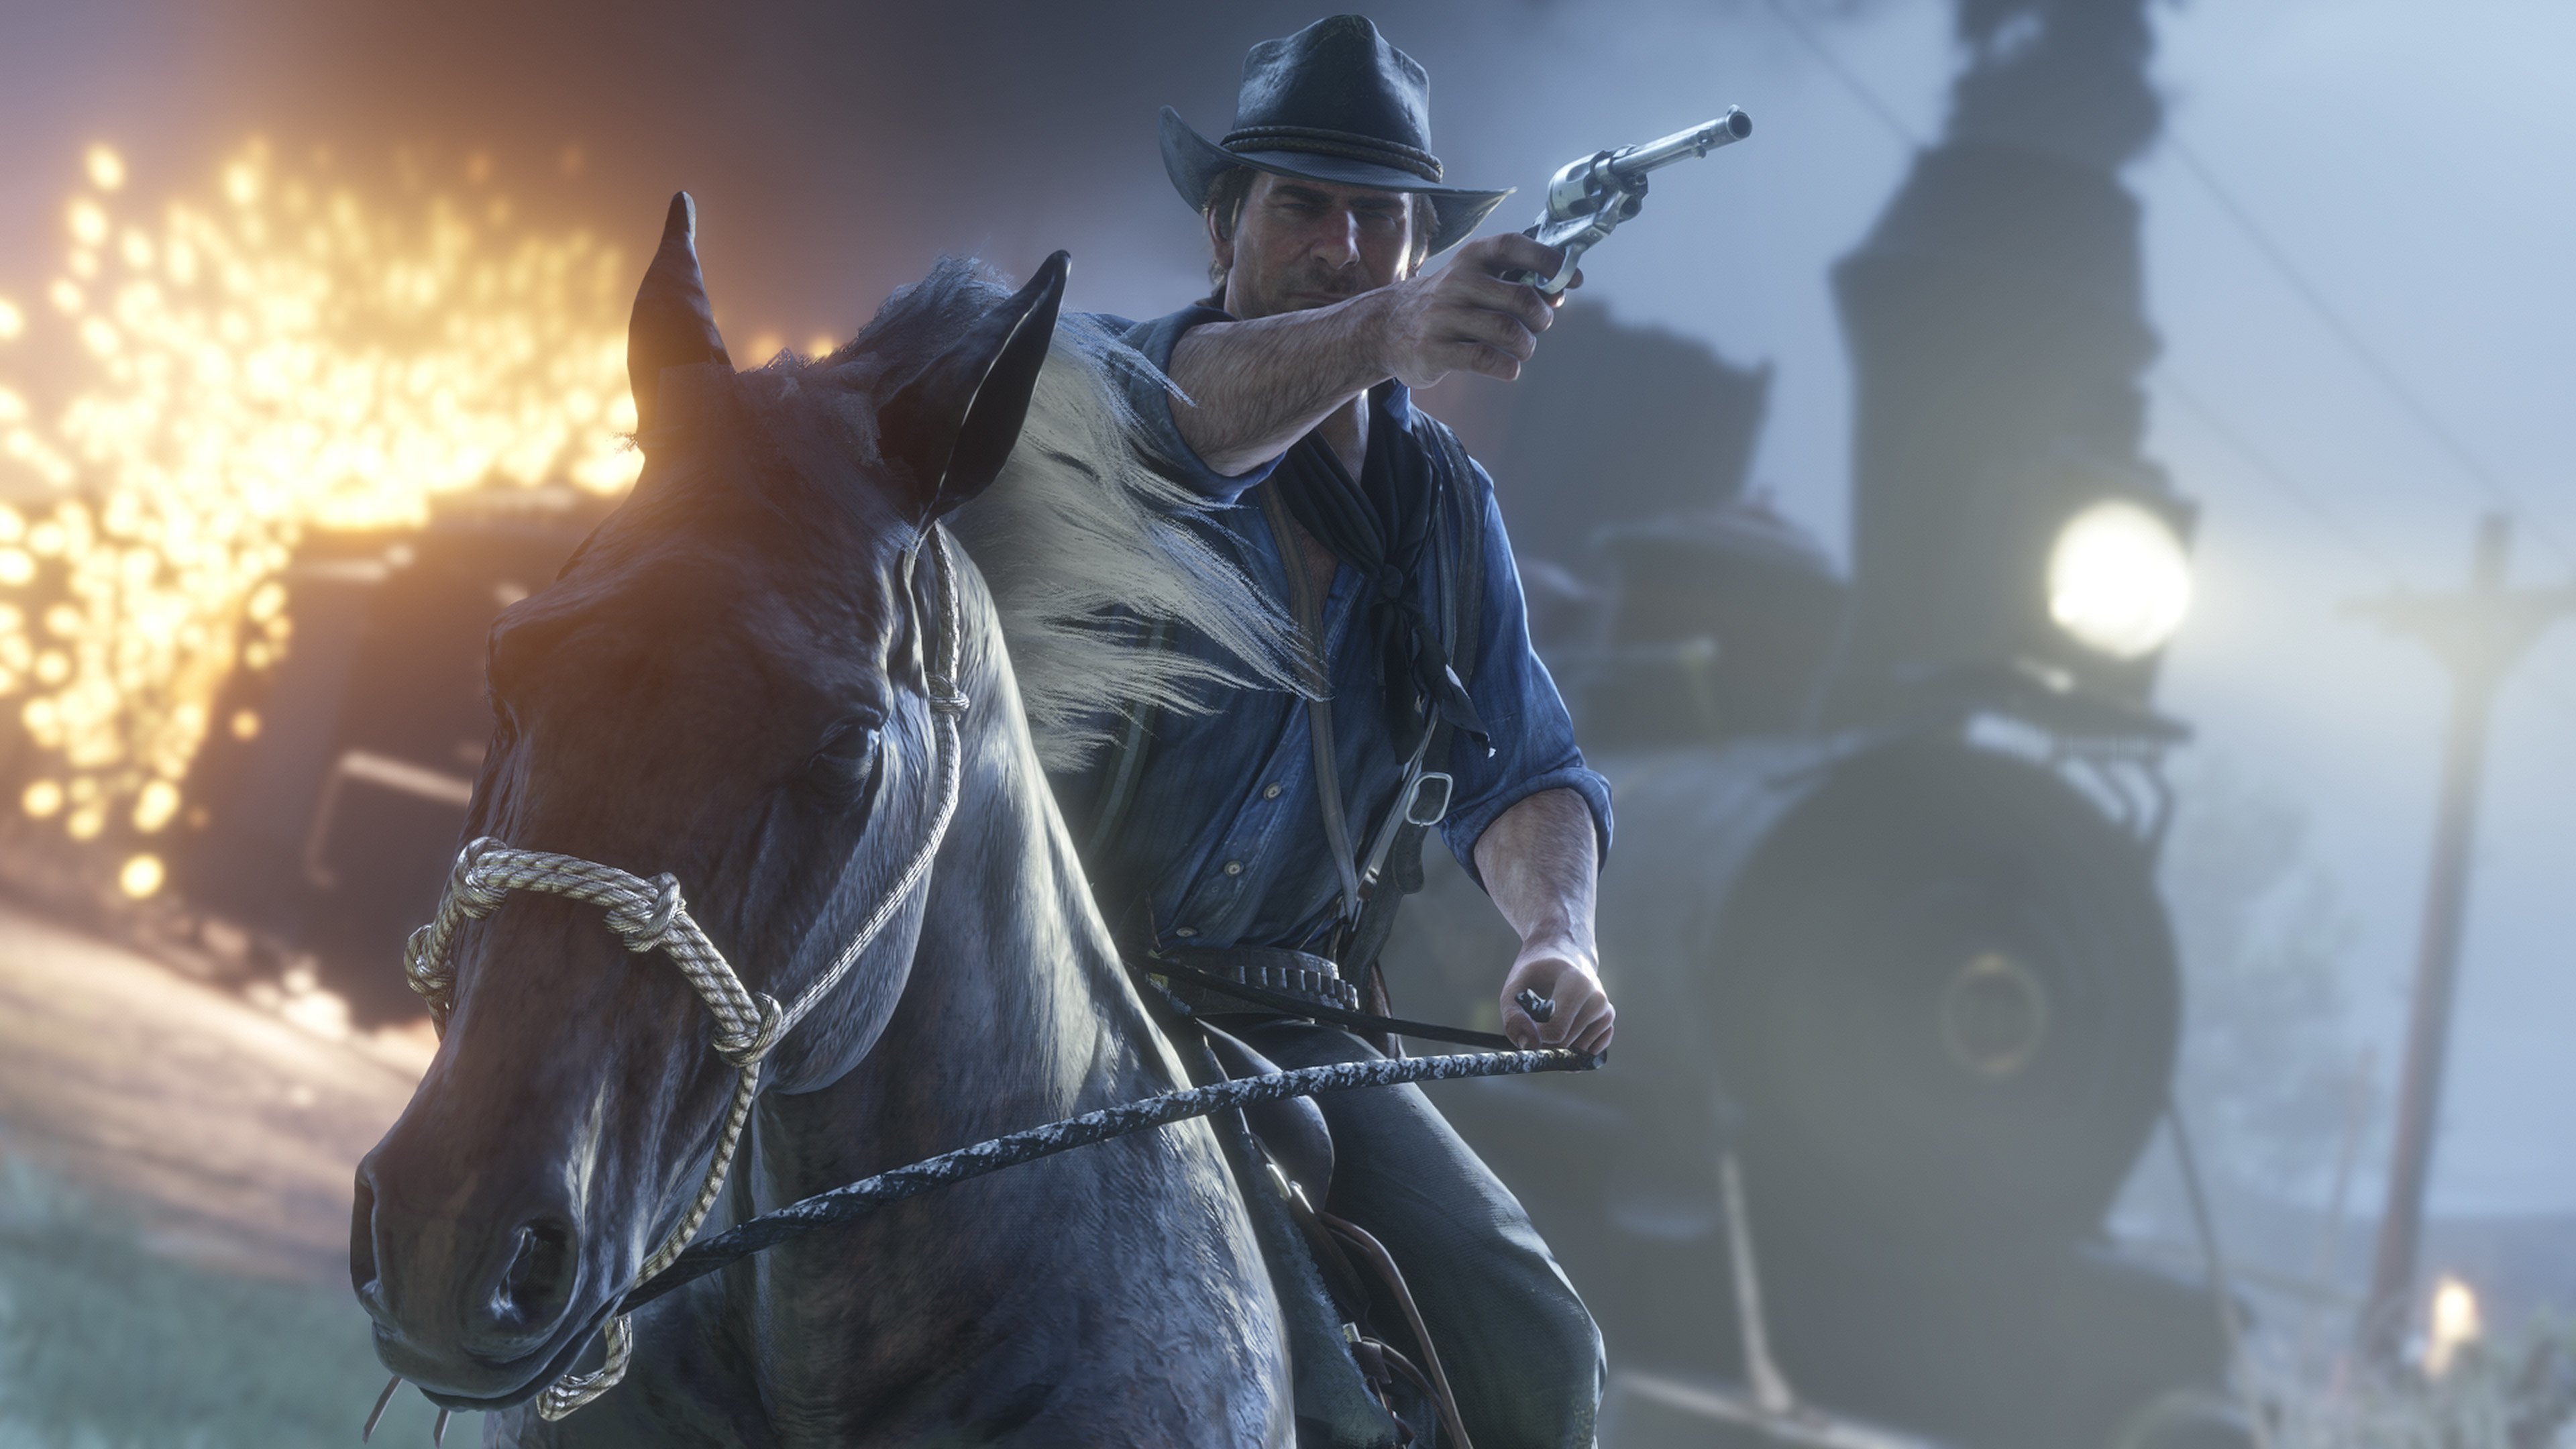 Download Arthur Morgan wallpapers for mobile phone free Arthur Morgan  HD pictures